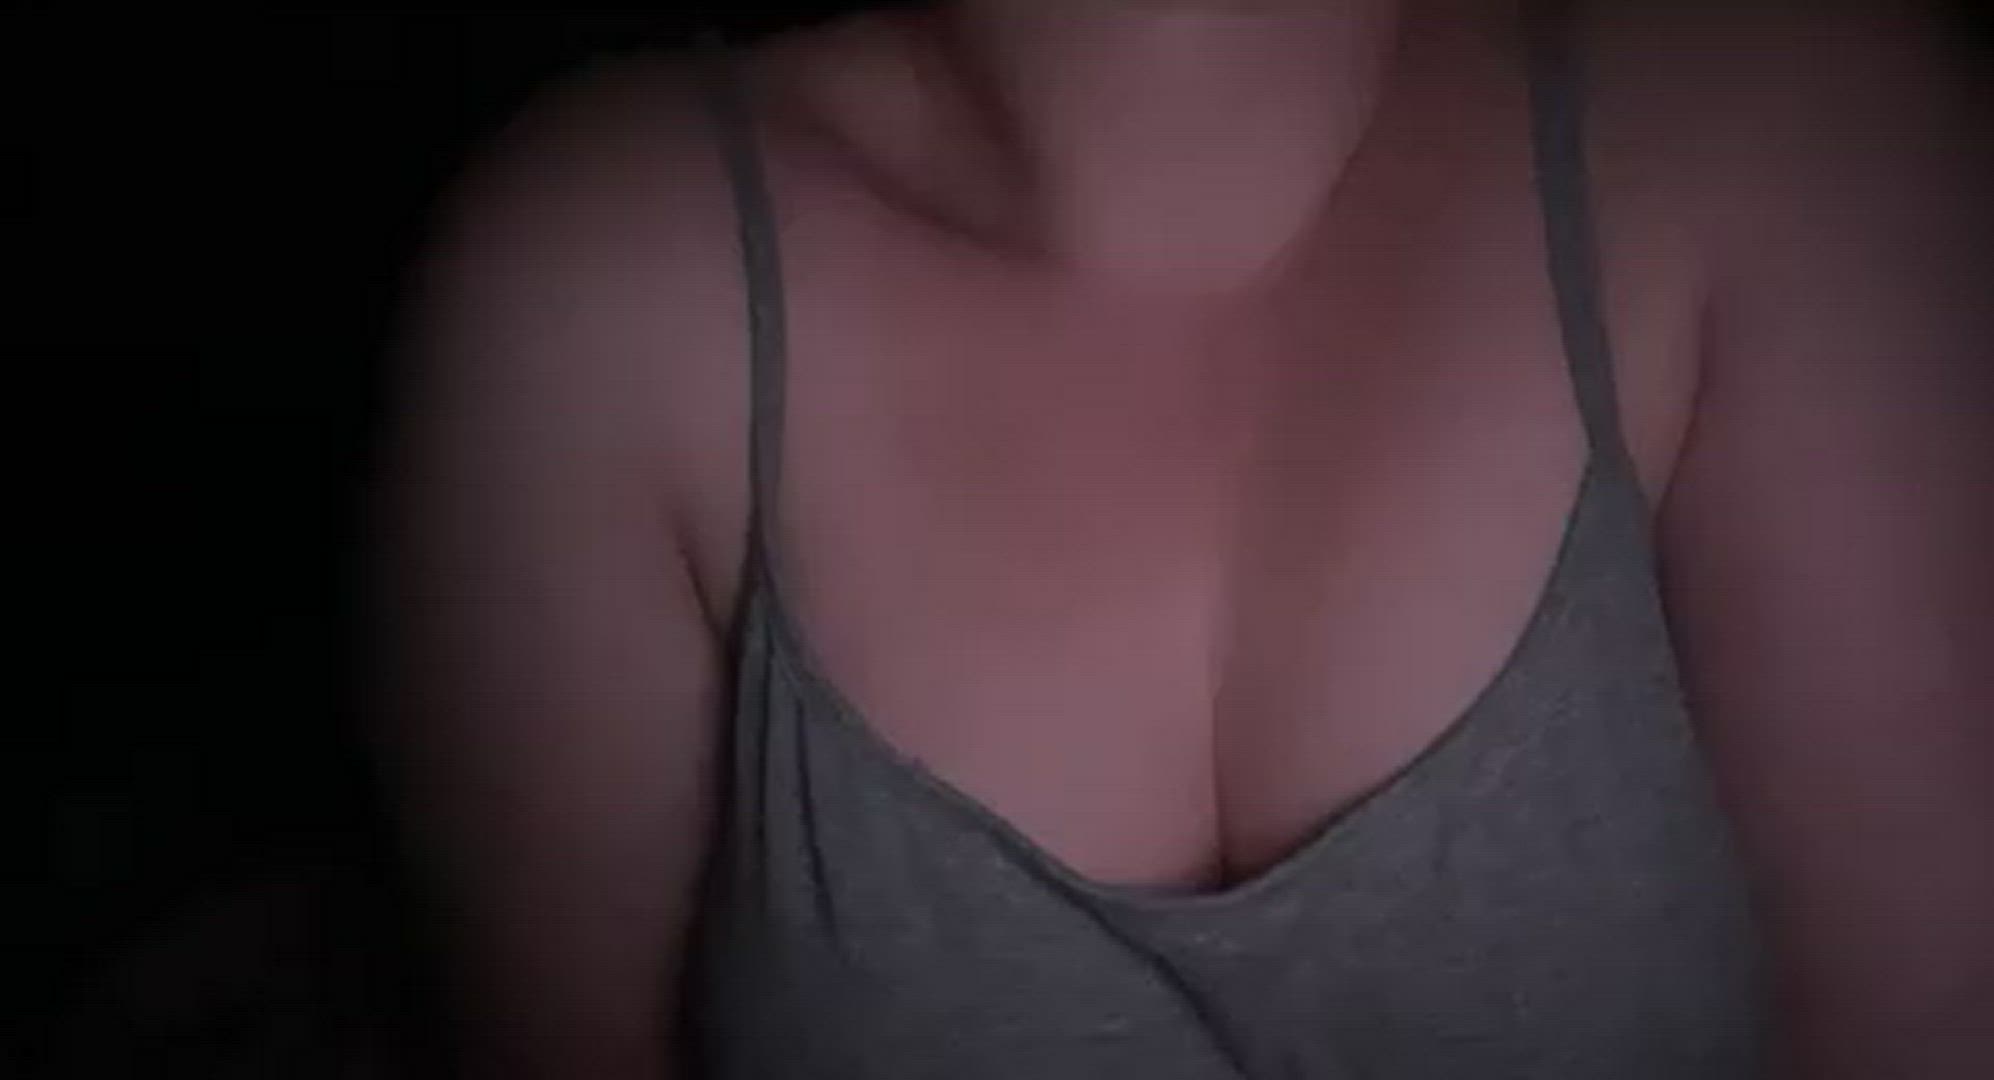 Big Tits porn video with onlyfans model banana7298 <strong>@banana7298</strong>